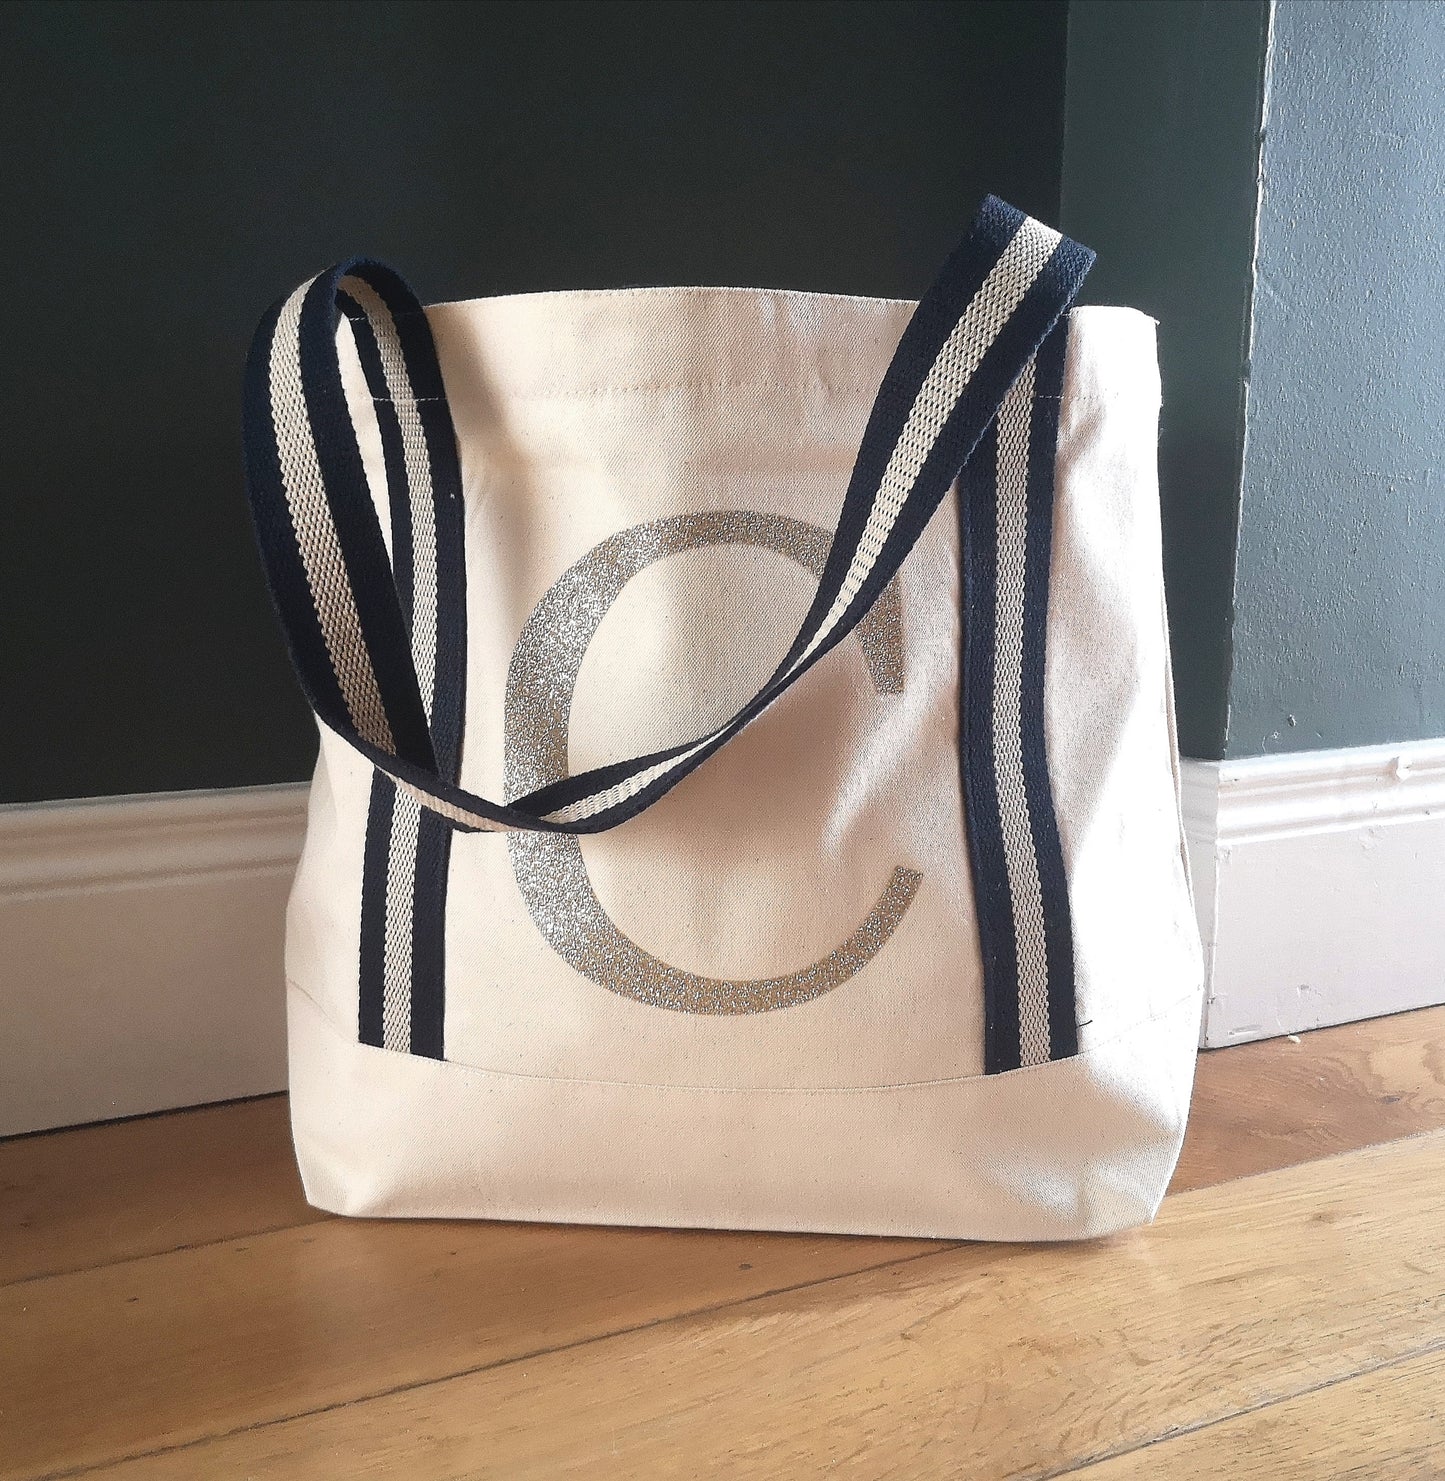 A sturdy natural organic cotton tote with navy and gold striped straps, and a glittery gold initial on the front in large type